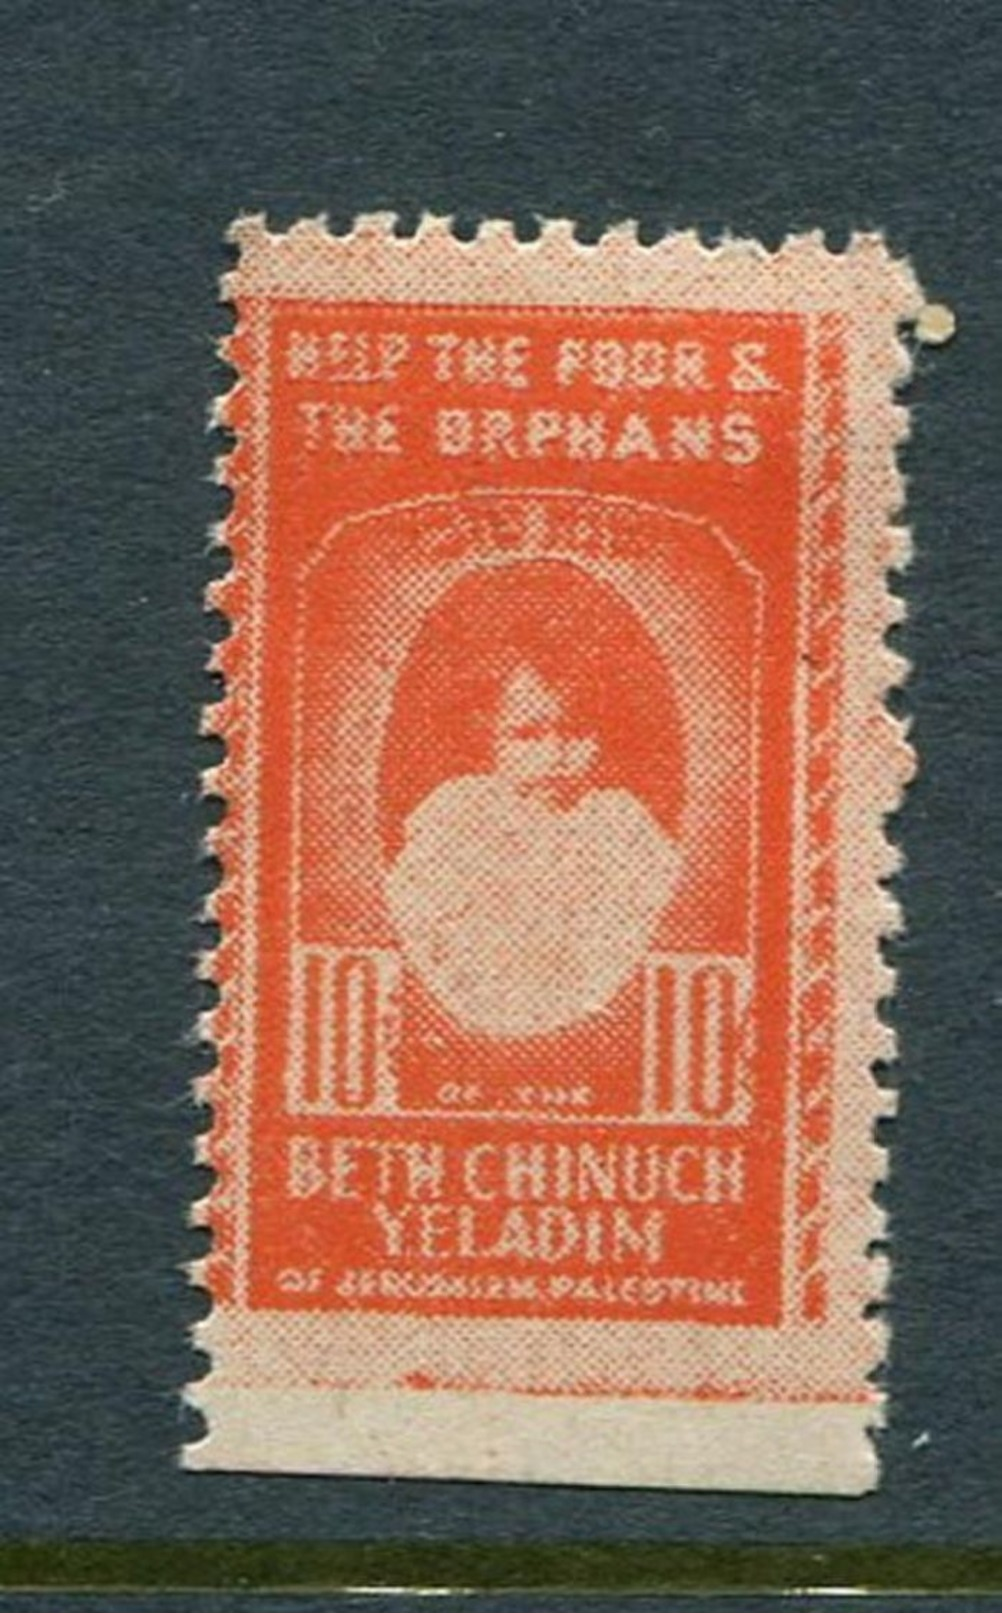 Help The Poor And The Orphans Beth Chinuch Yeladim Seal/ Reklamemarke Poster Stamp Vignette Hinged 3/4 X 1 1/4" - Cinderellas